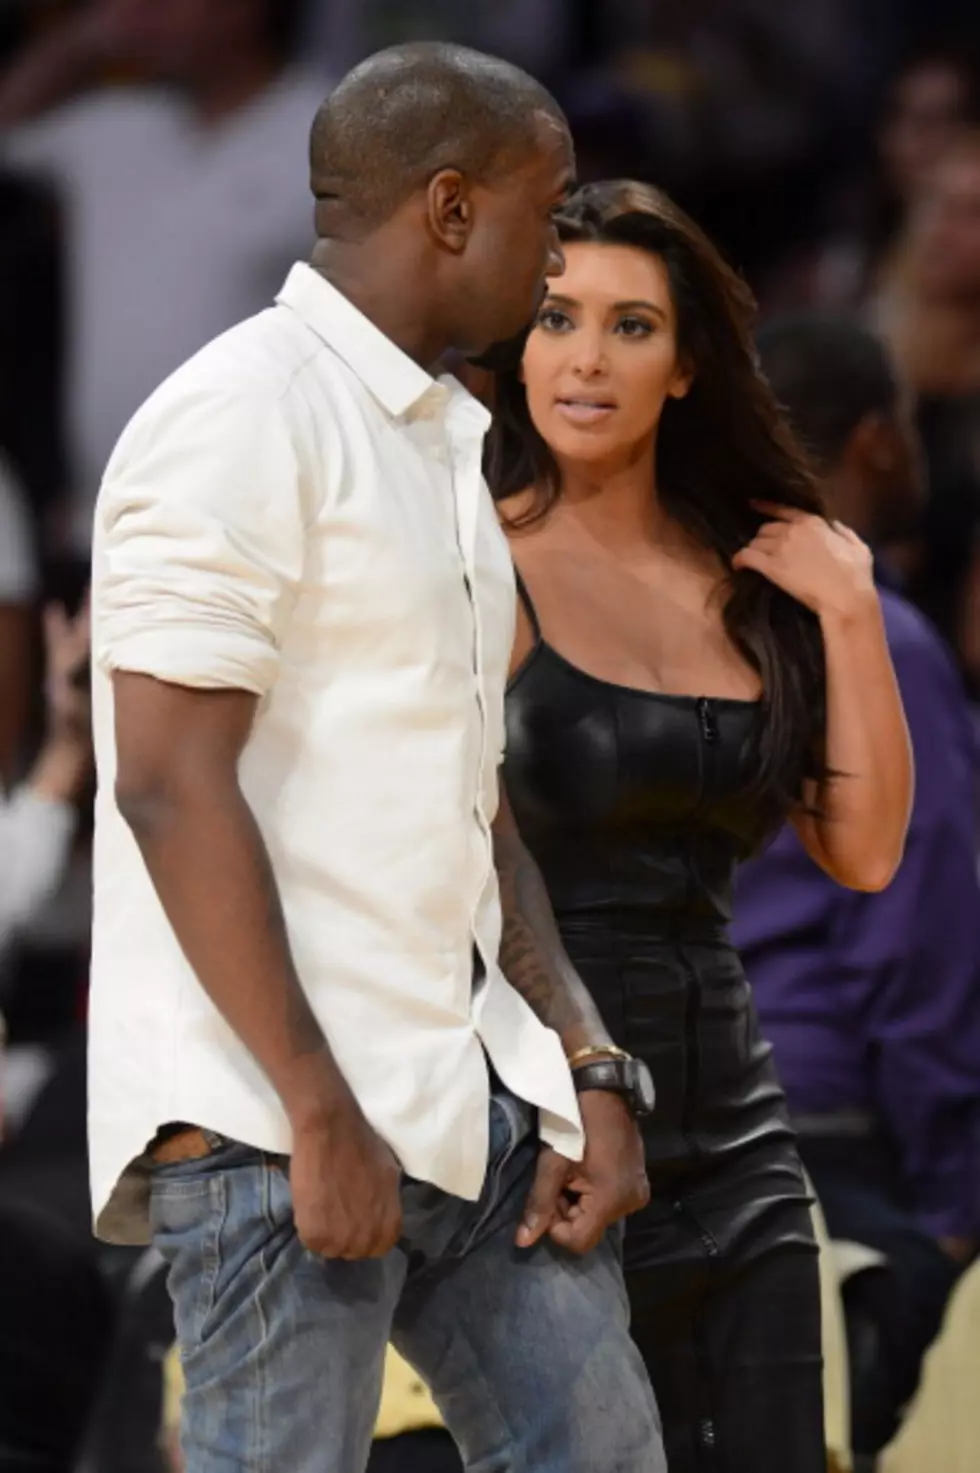 Are Kim Kardashian and Kanye Trying to Cover Up an Adulterous Affair? [POLL]